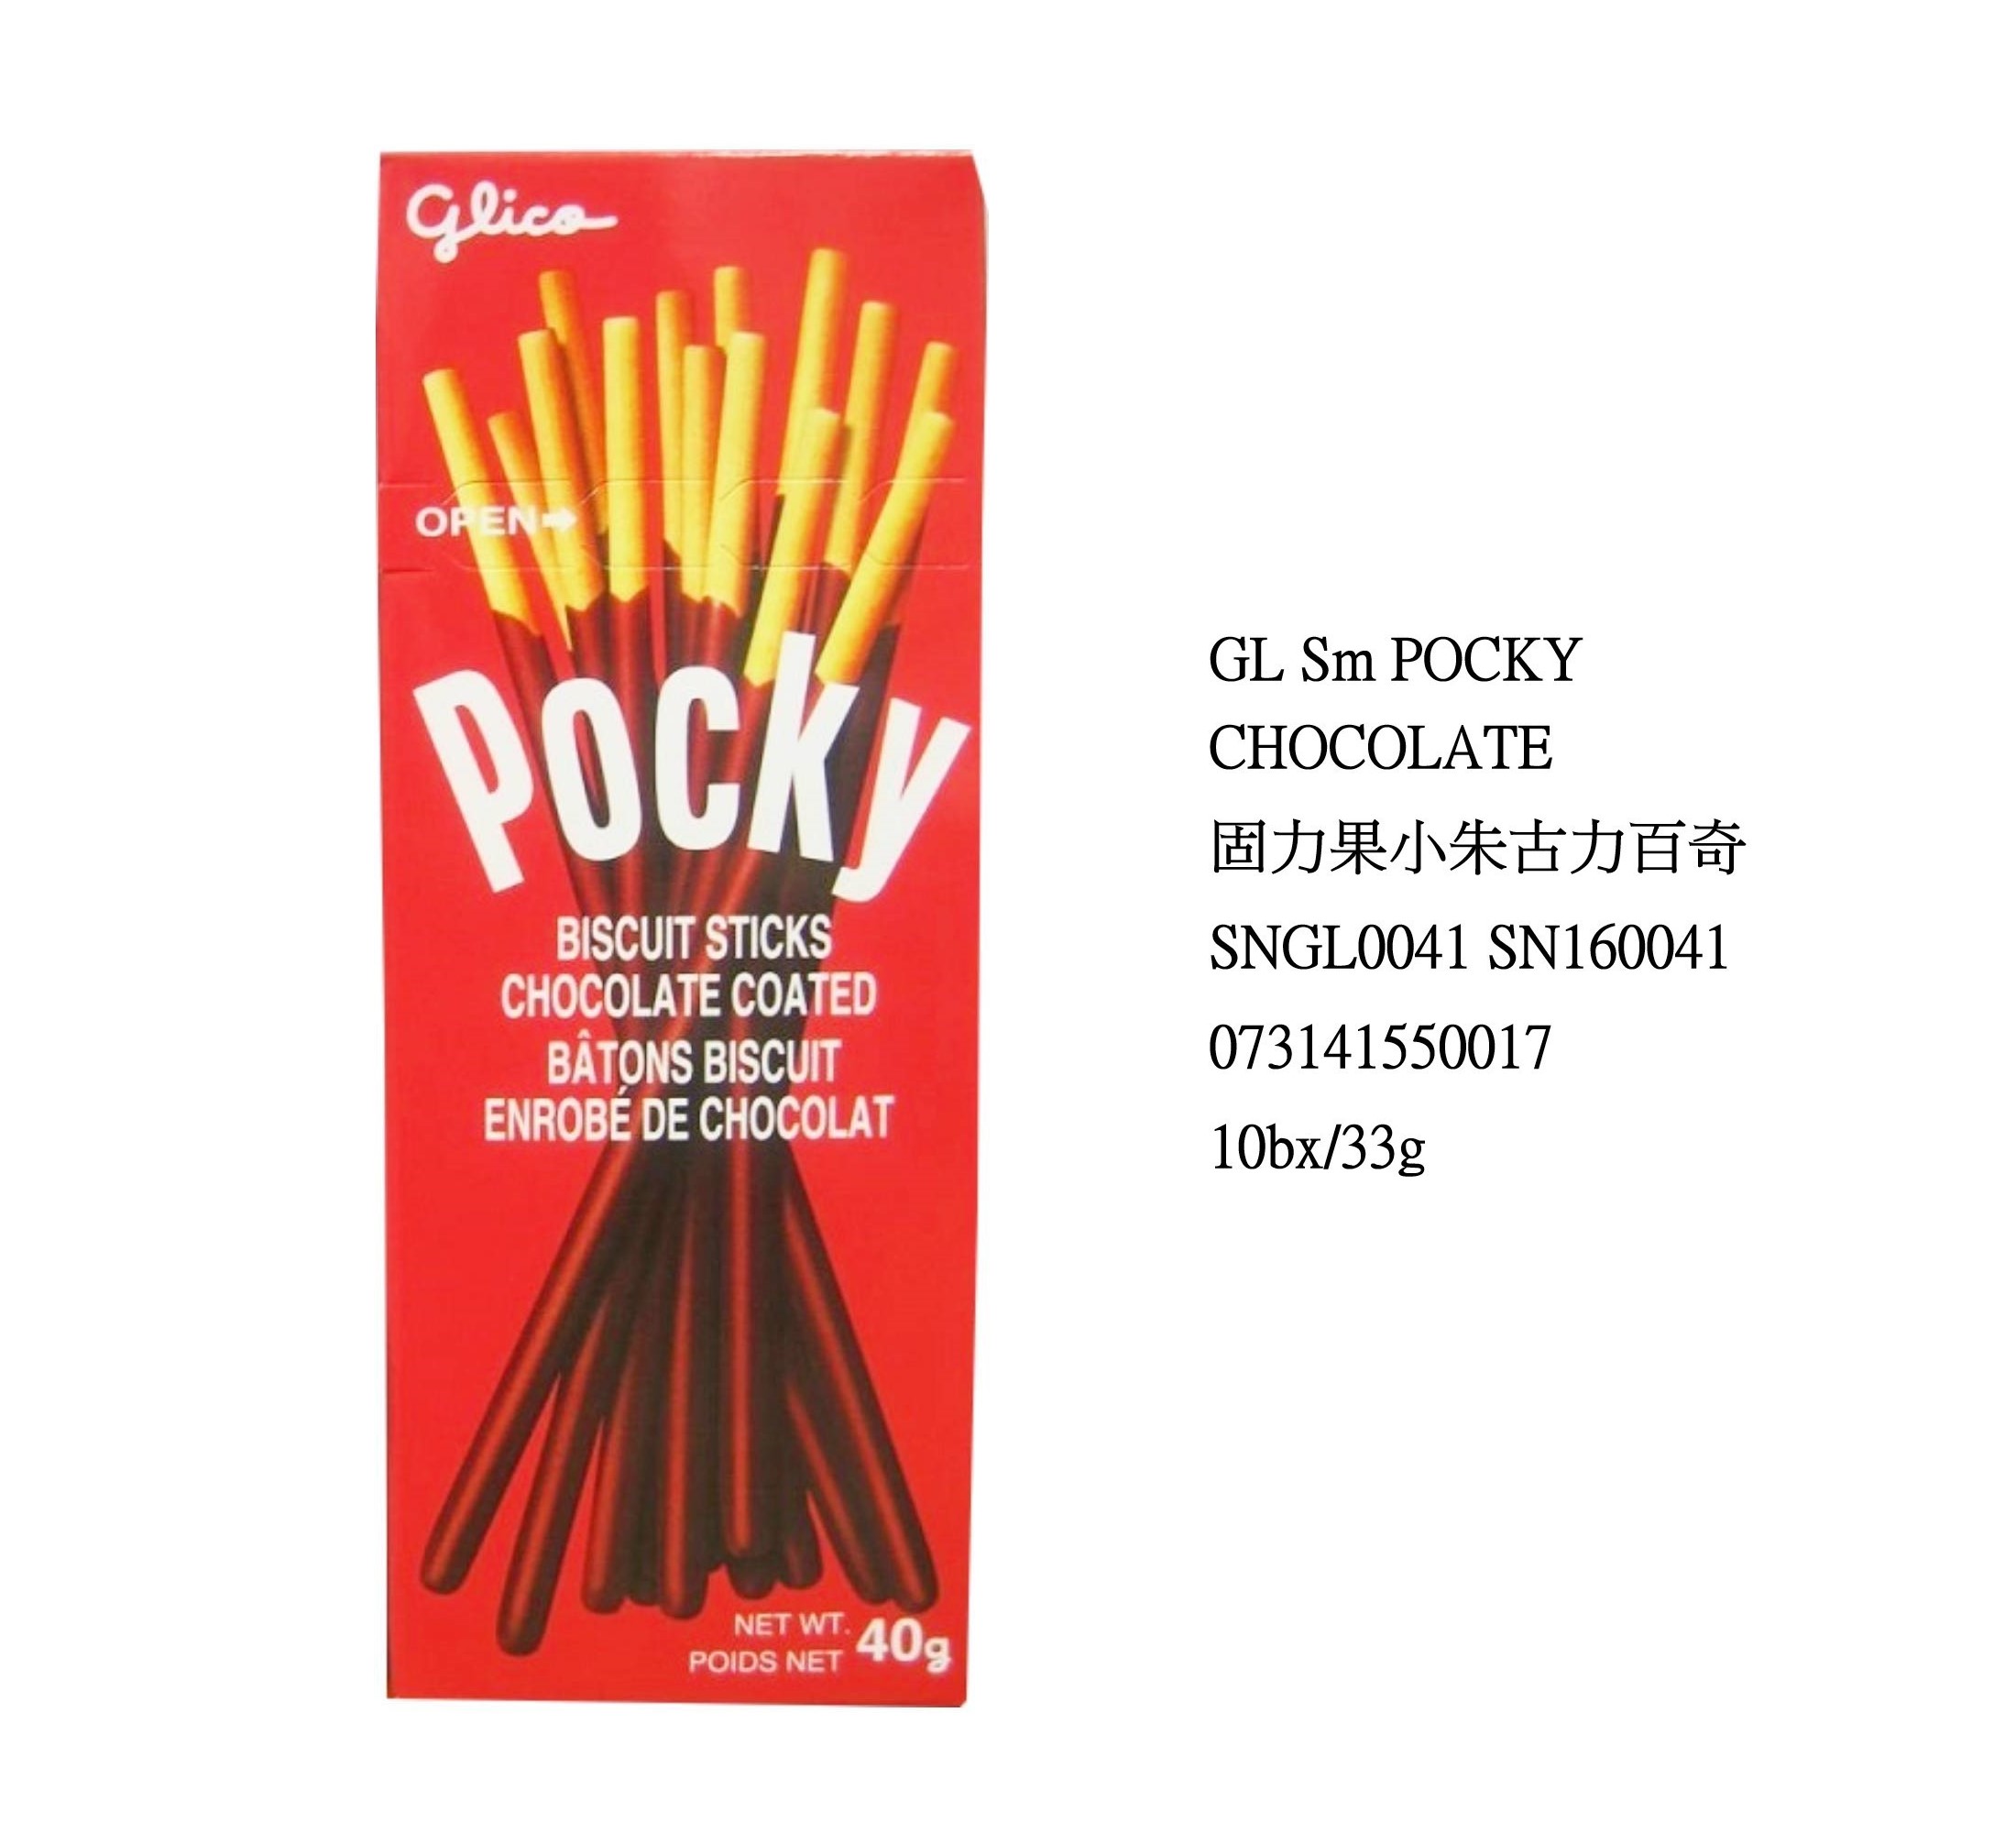 GLICO POCKY CHOCOLATED COATED BISCUIT STICKS (SM) SN160041